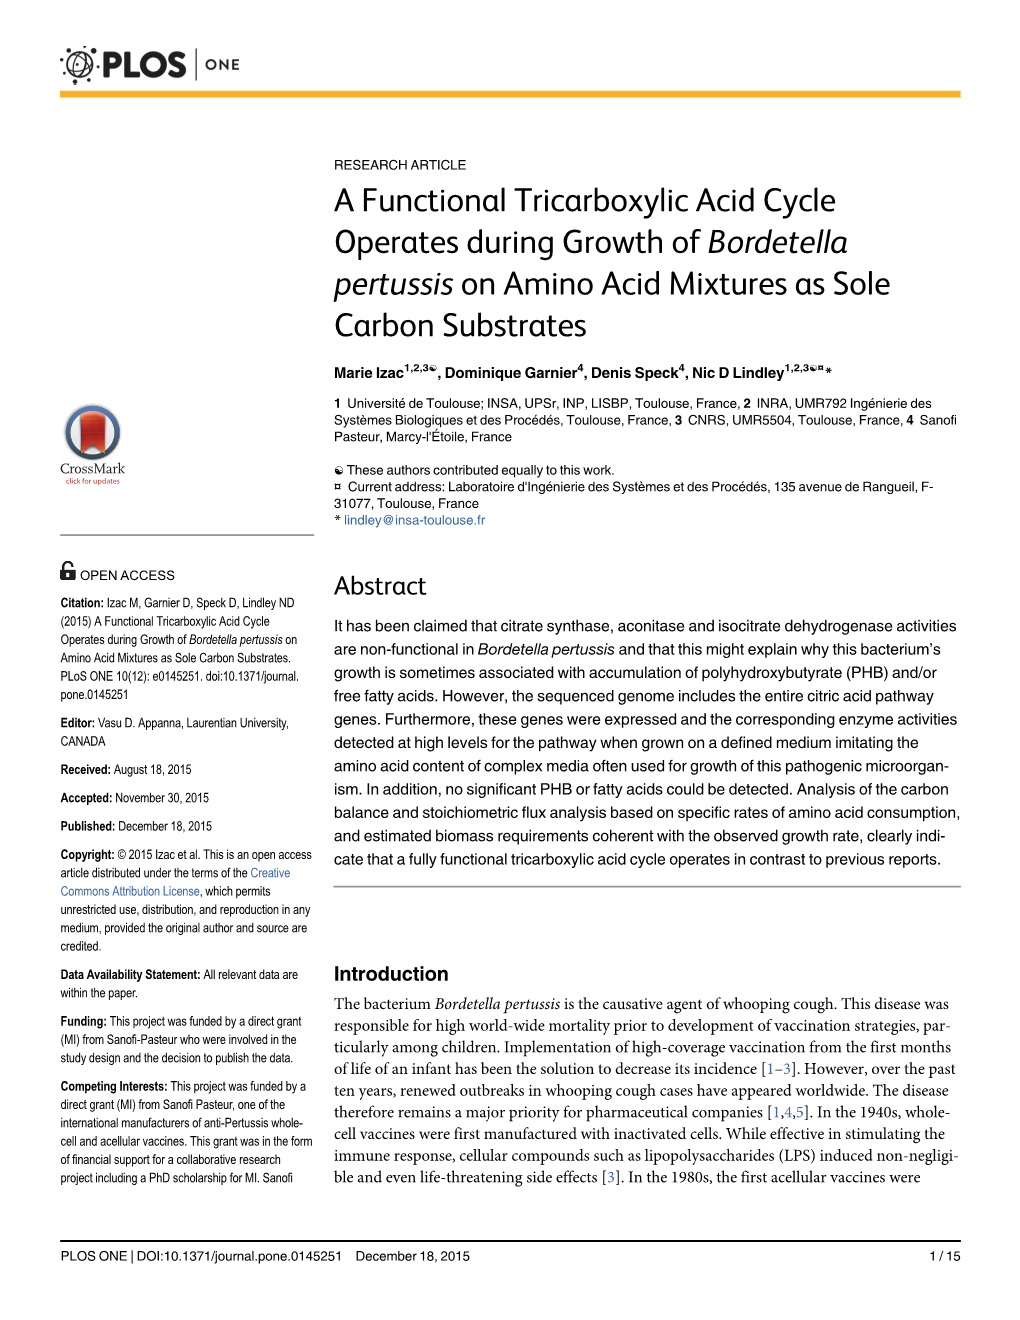 A Functional Tricarboxylic Acid Cycle Operates During Growth of Bordetella Pertussis on Amino Acid Mixtures As Sole Carbon Substrates